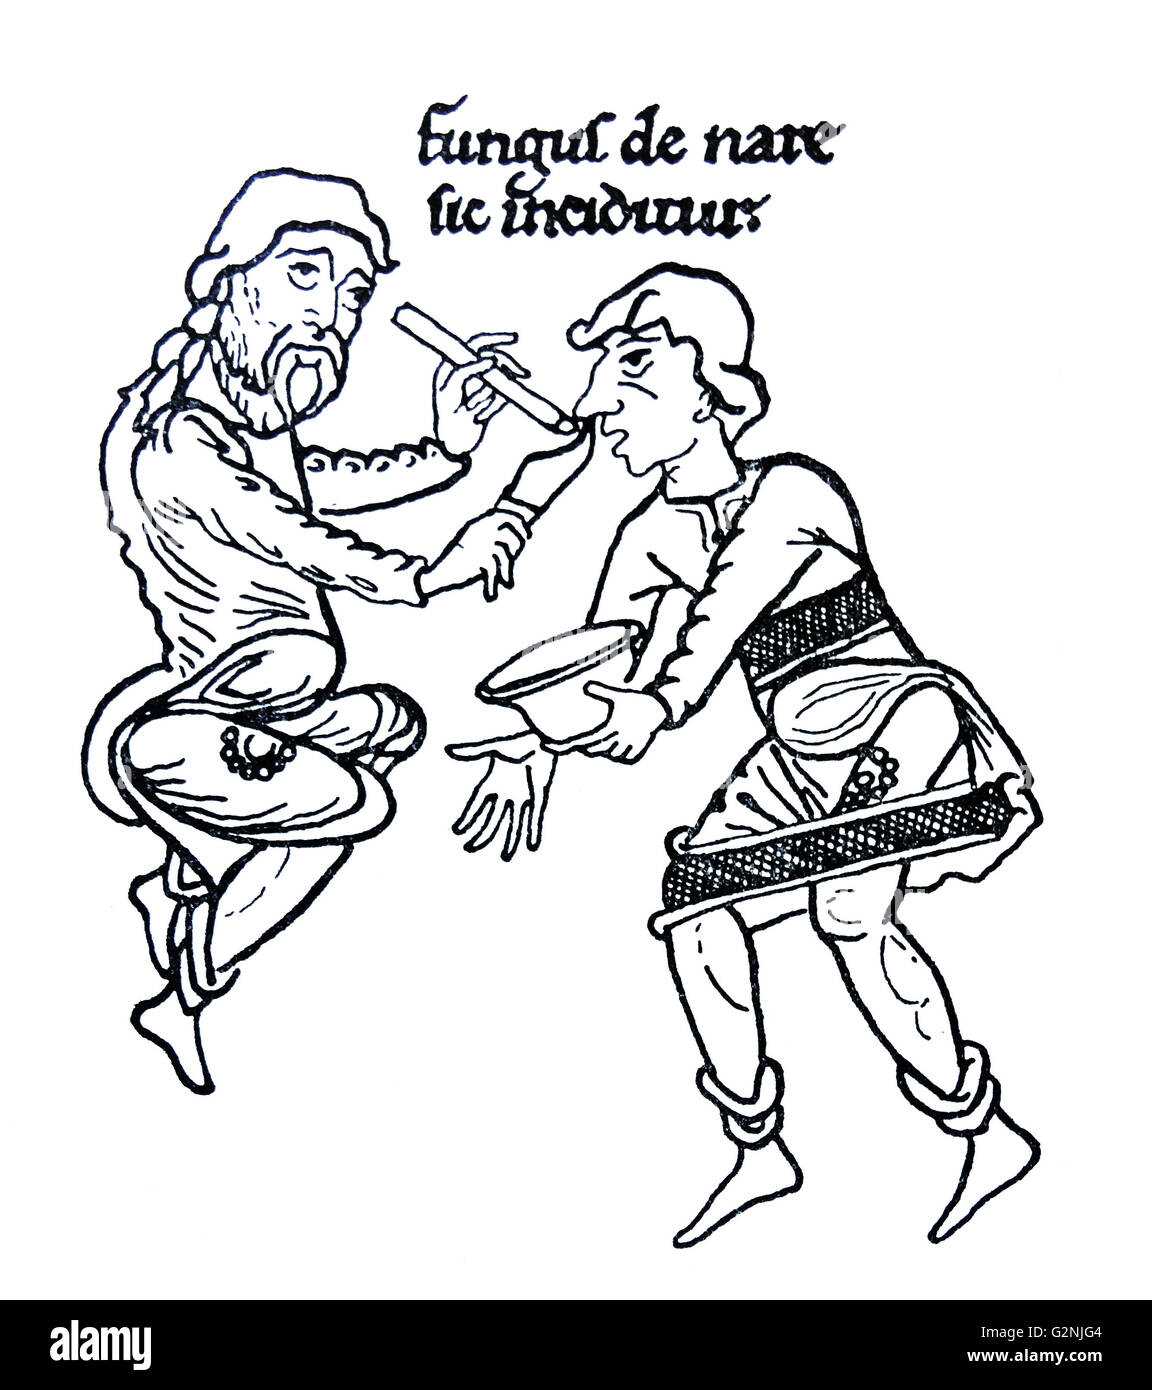 Drawing of the mediaeval treatment of a nasal affliction. The text above is 'Fungus de nase sic inciditur' which translates to 'Thus polypus is cut out of the nose'. Dated 12th Century Stock Photo